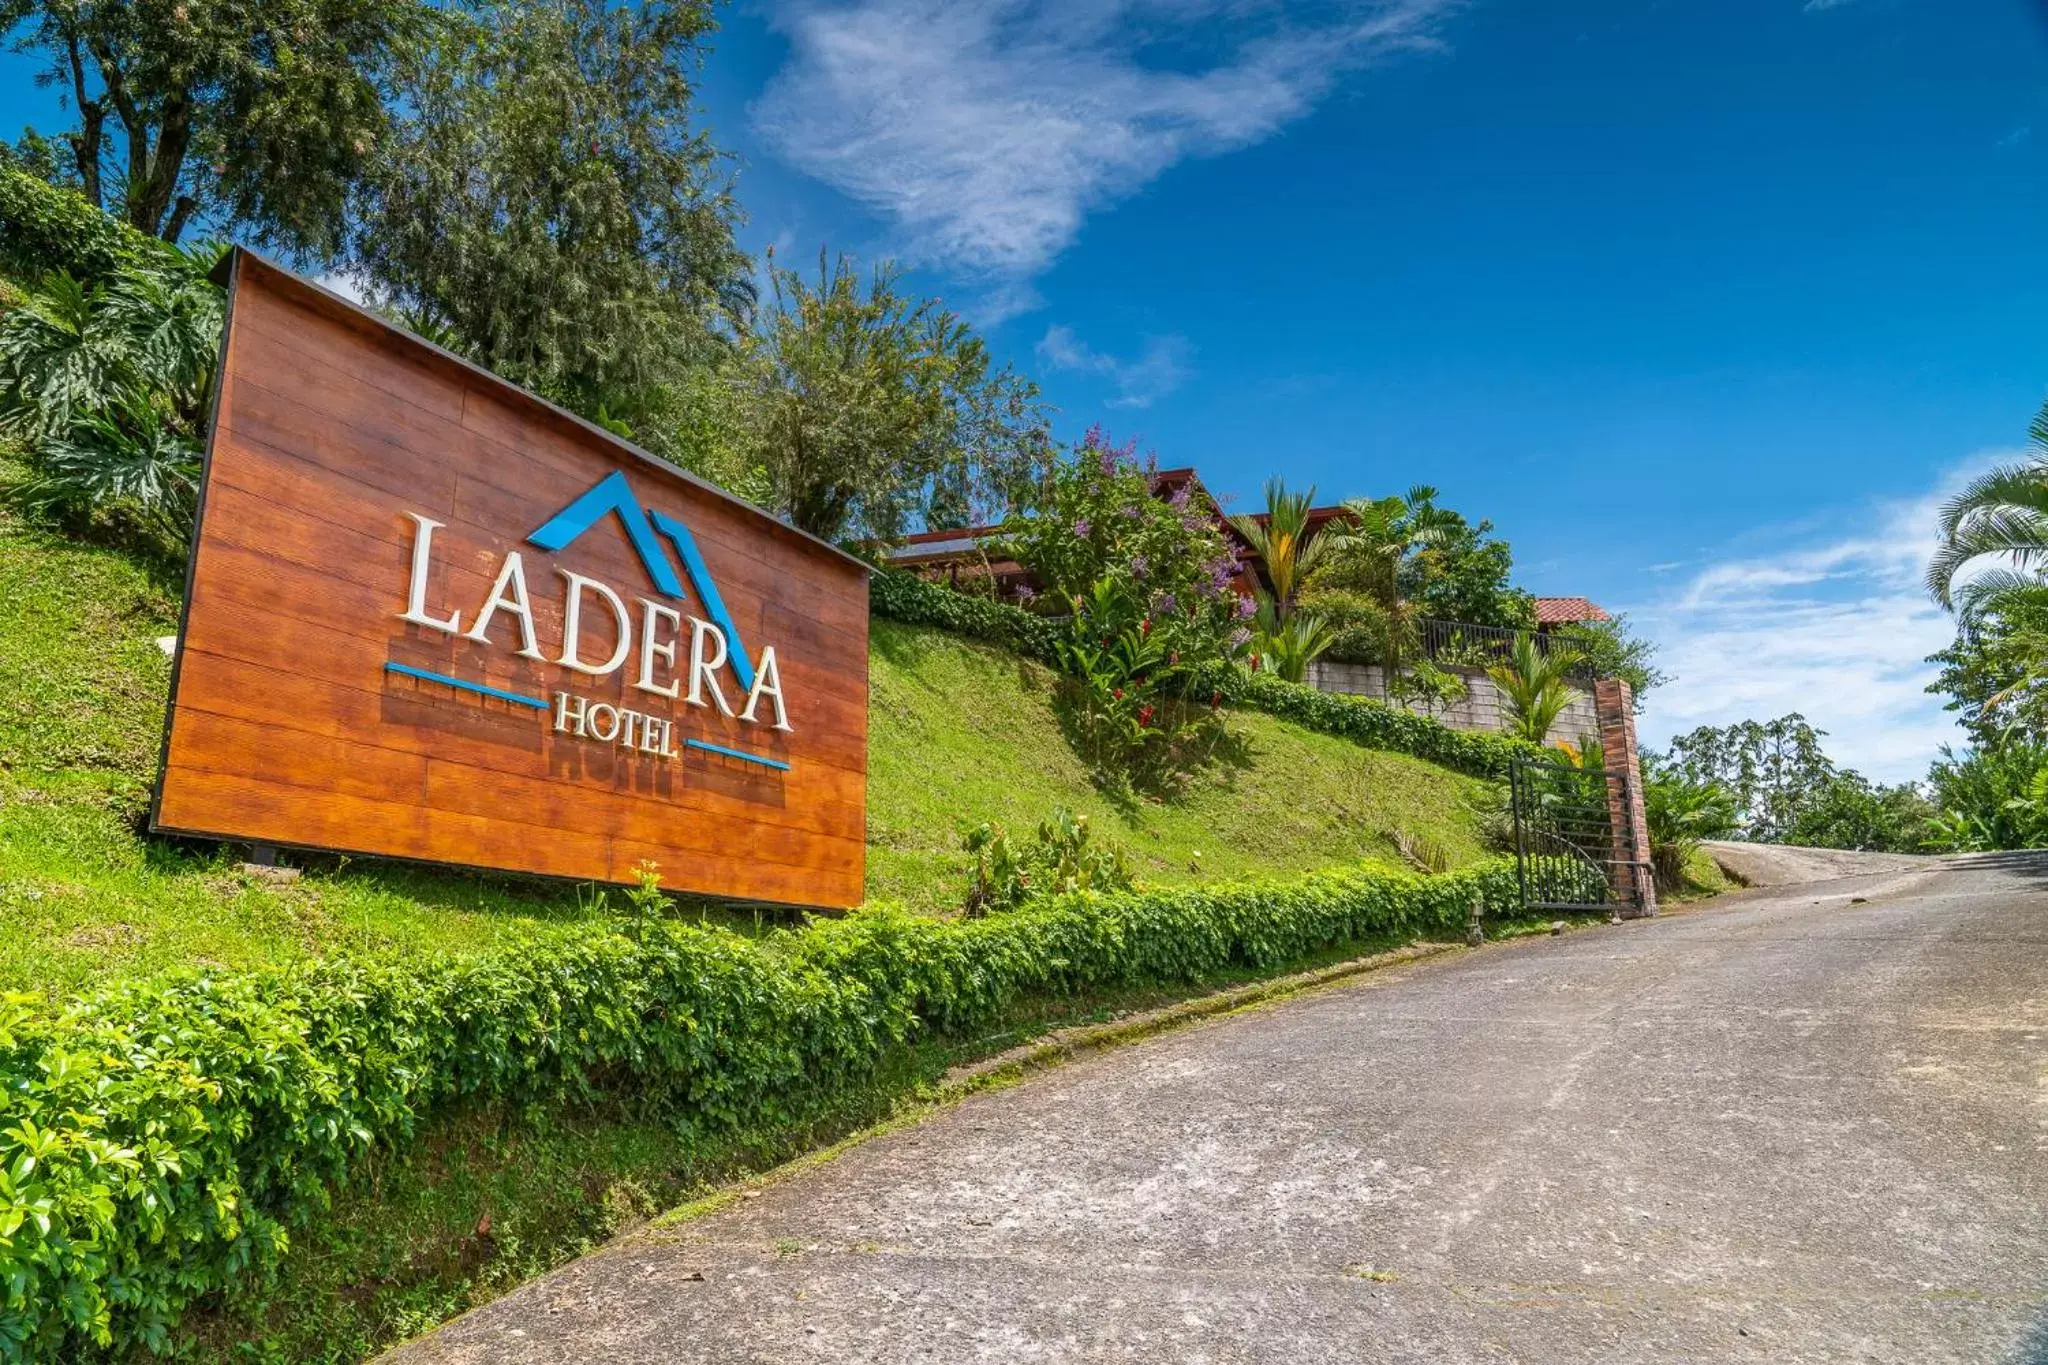 Property building in Ladera Hotel